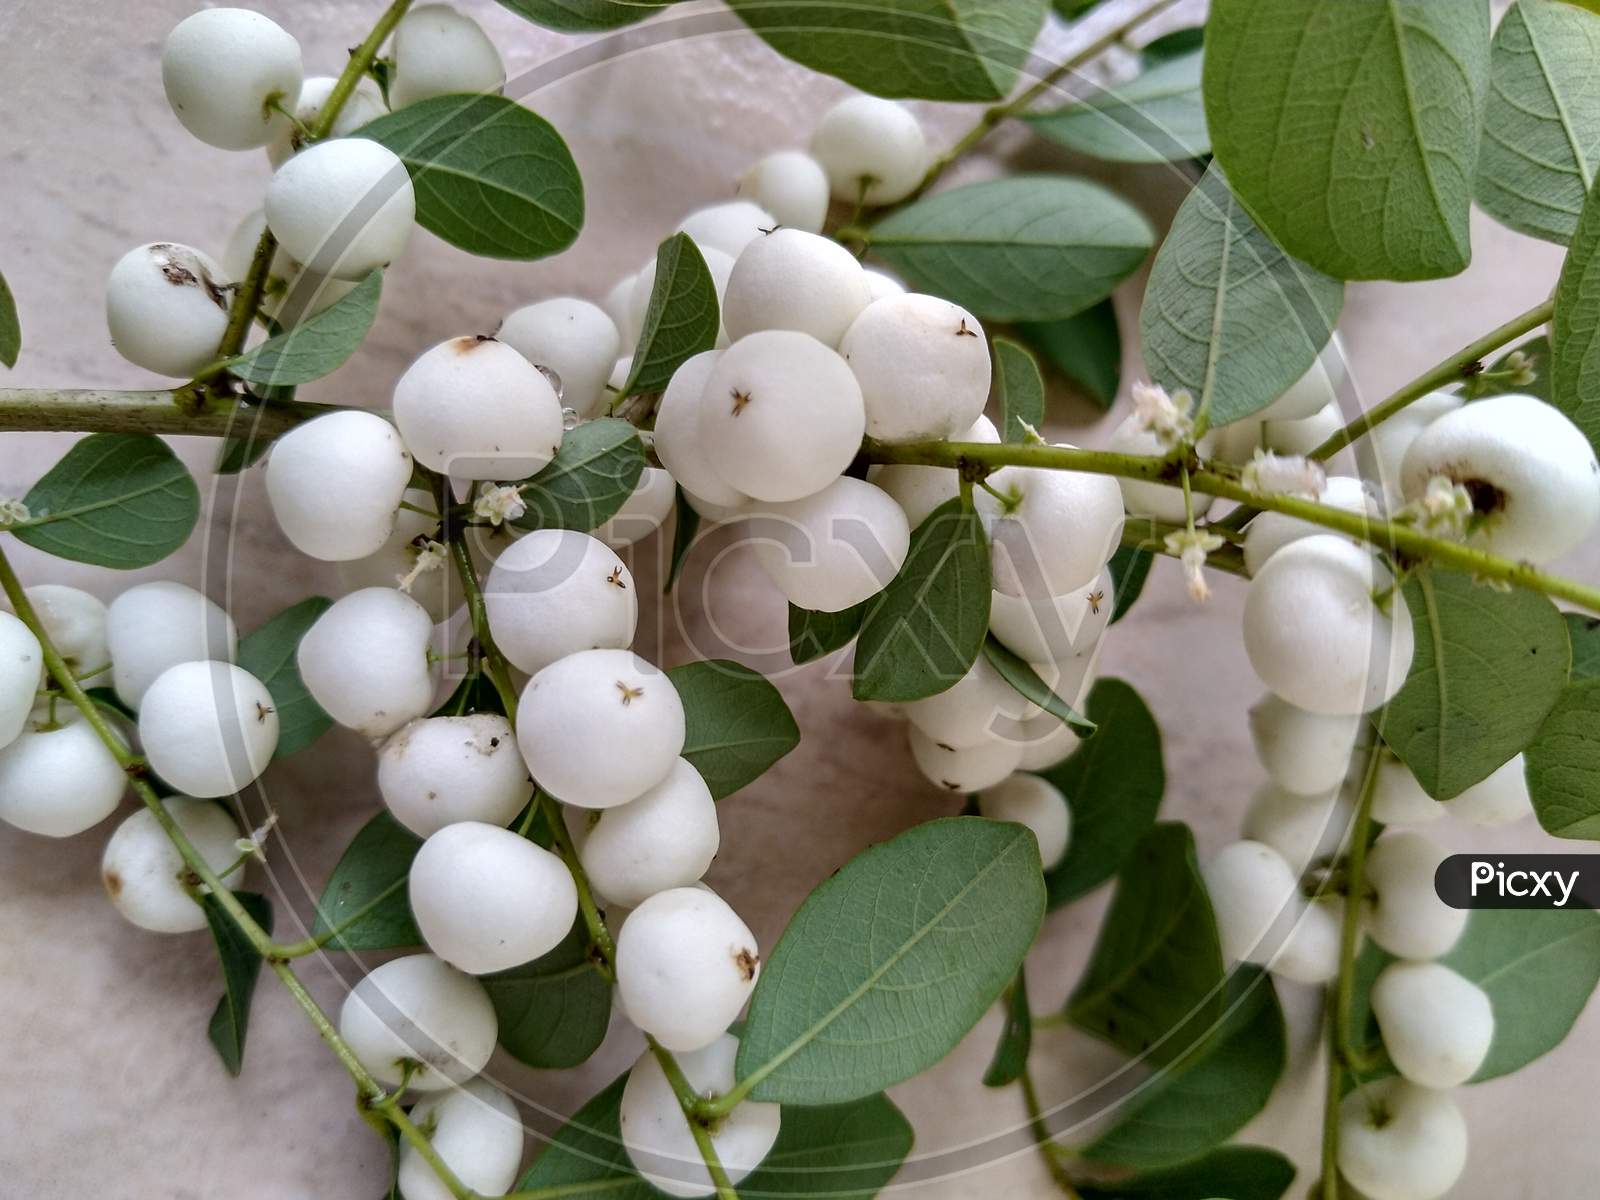 Beautiful sprig of snowberry fruits like white snow balls.